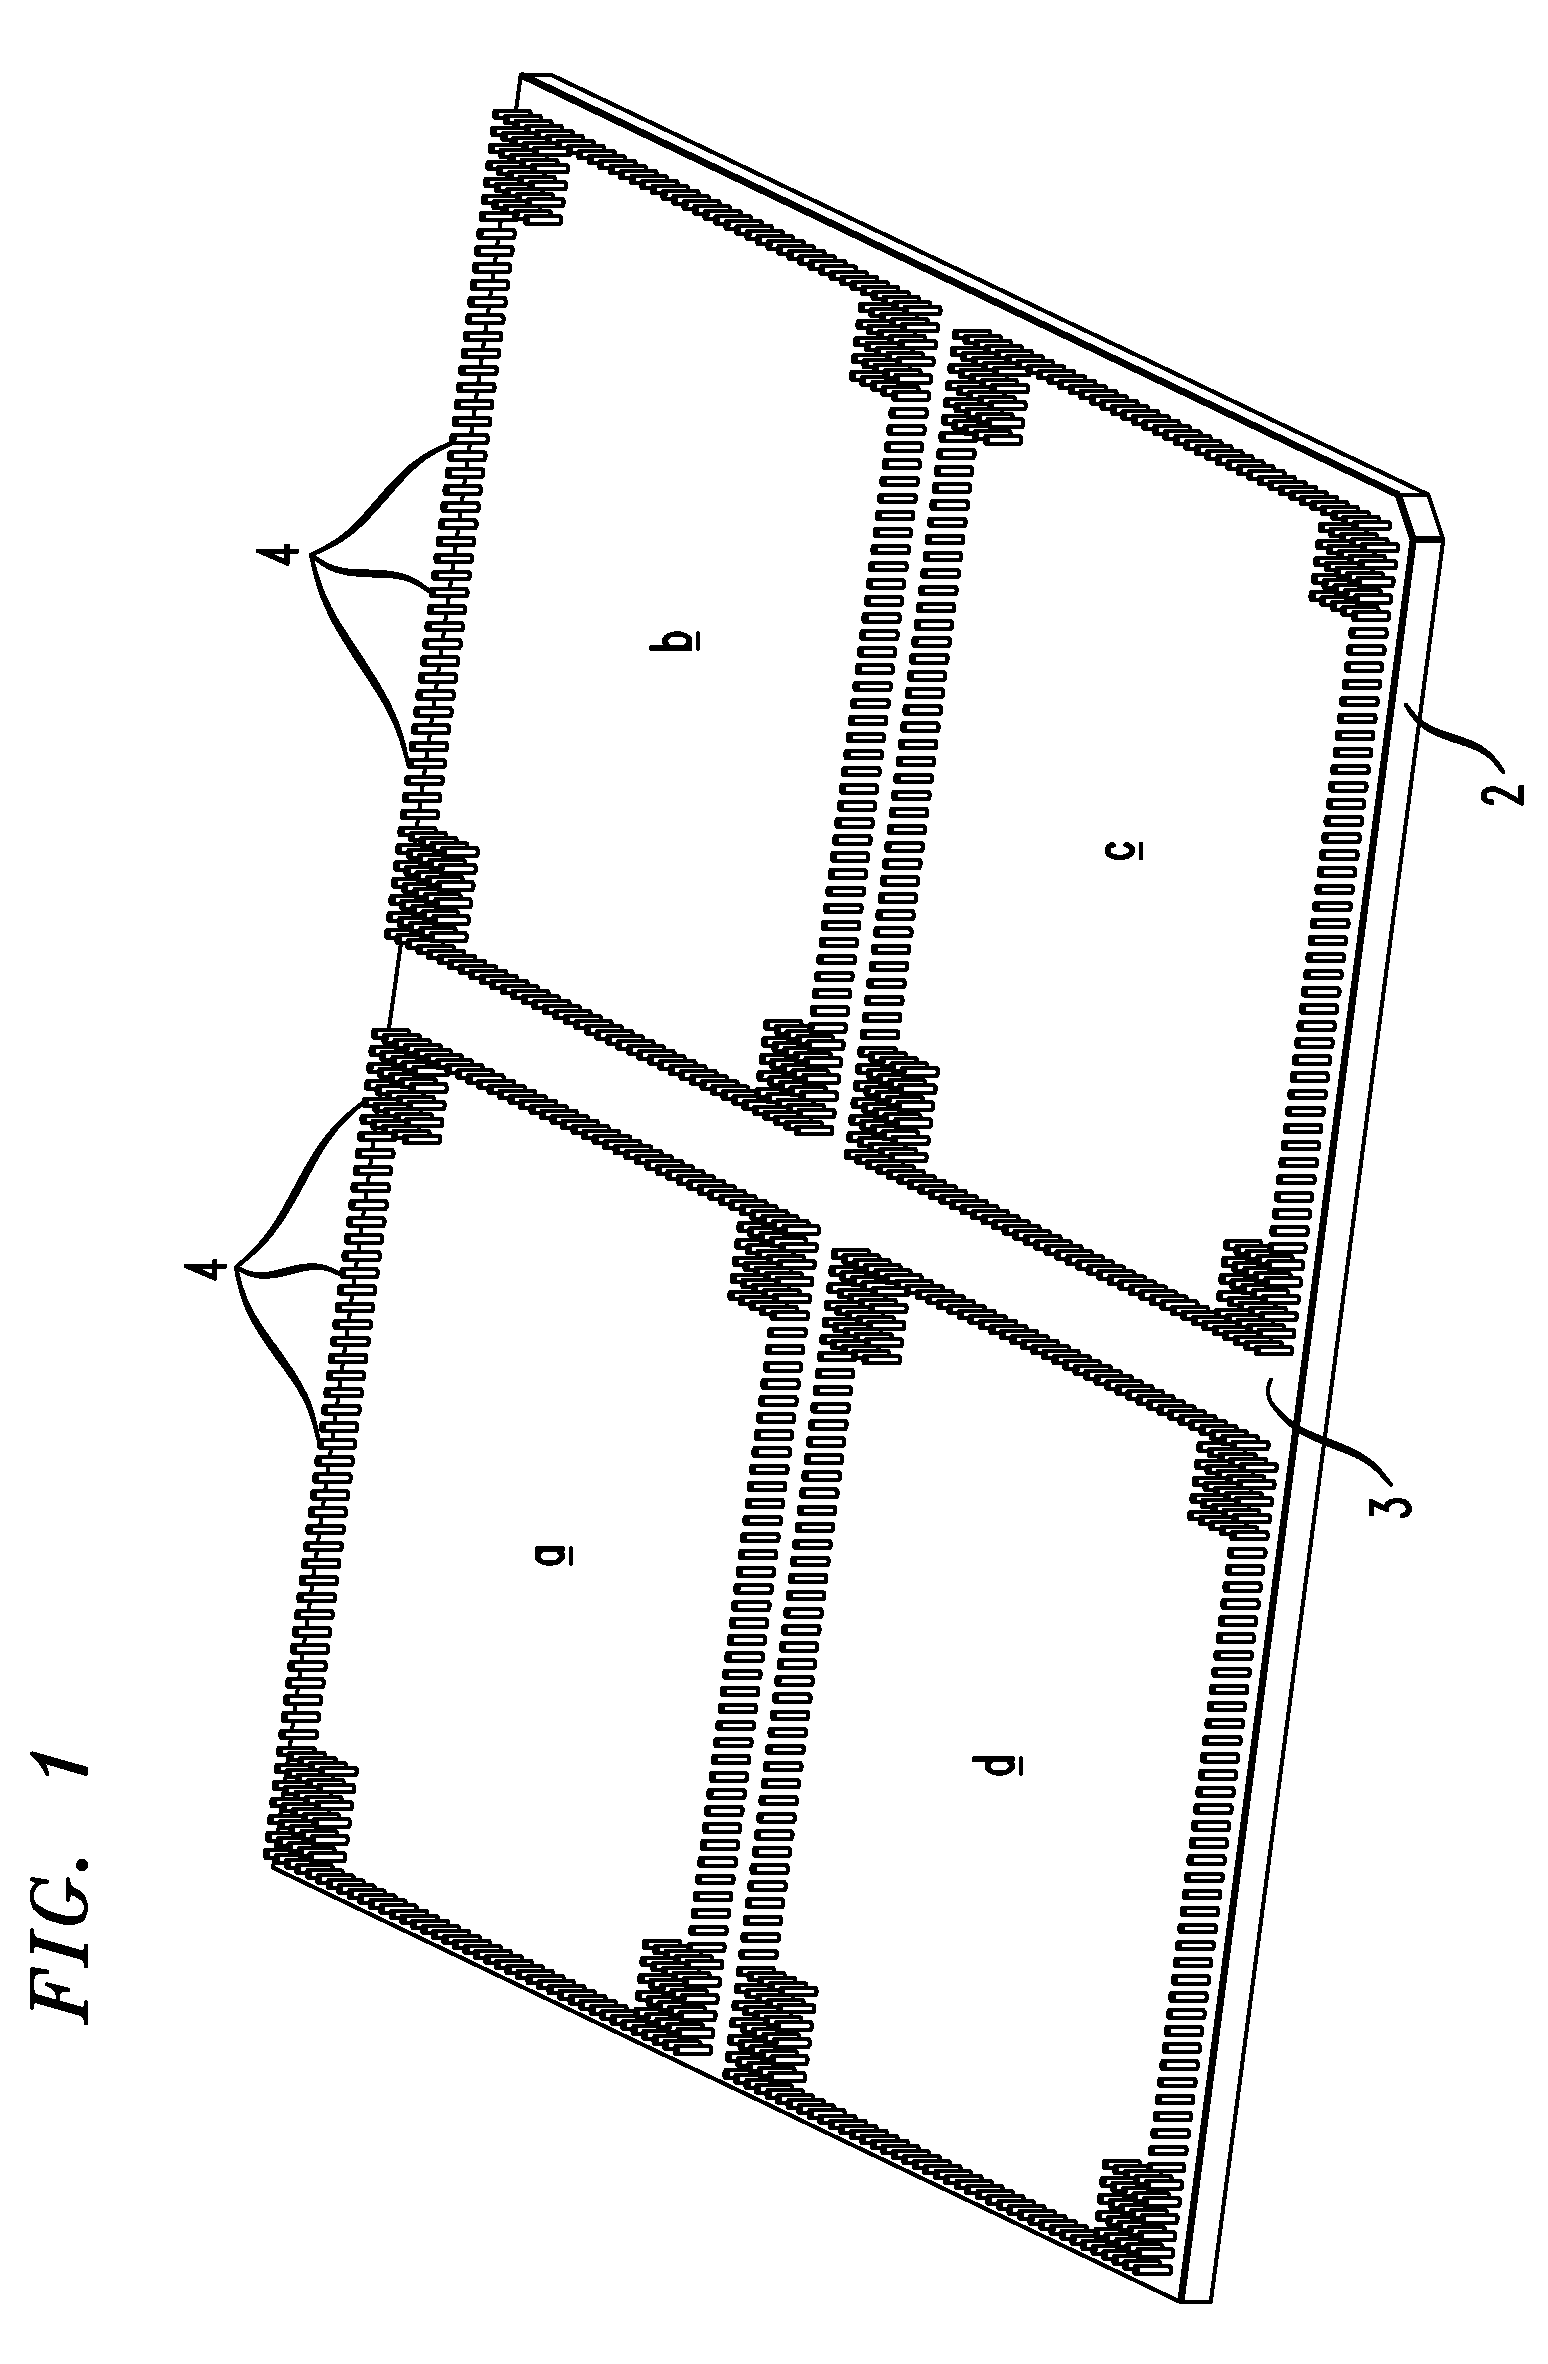 Pin grid array zero insertion force connectors configurable for supporting large pin counts